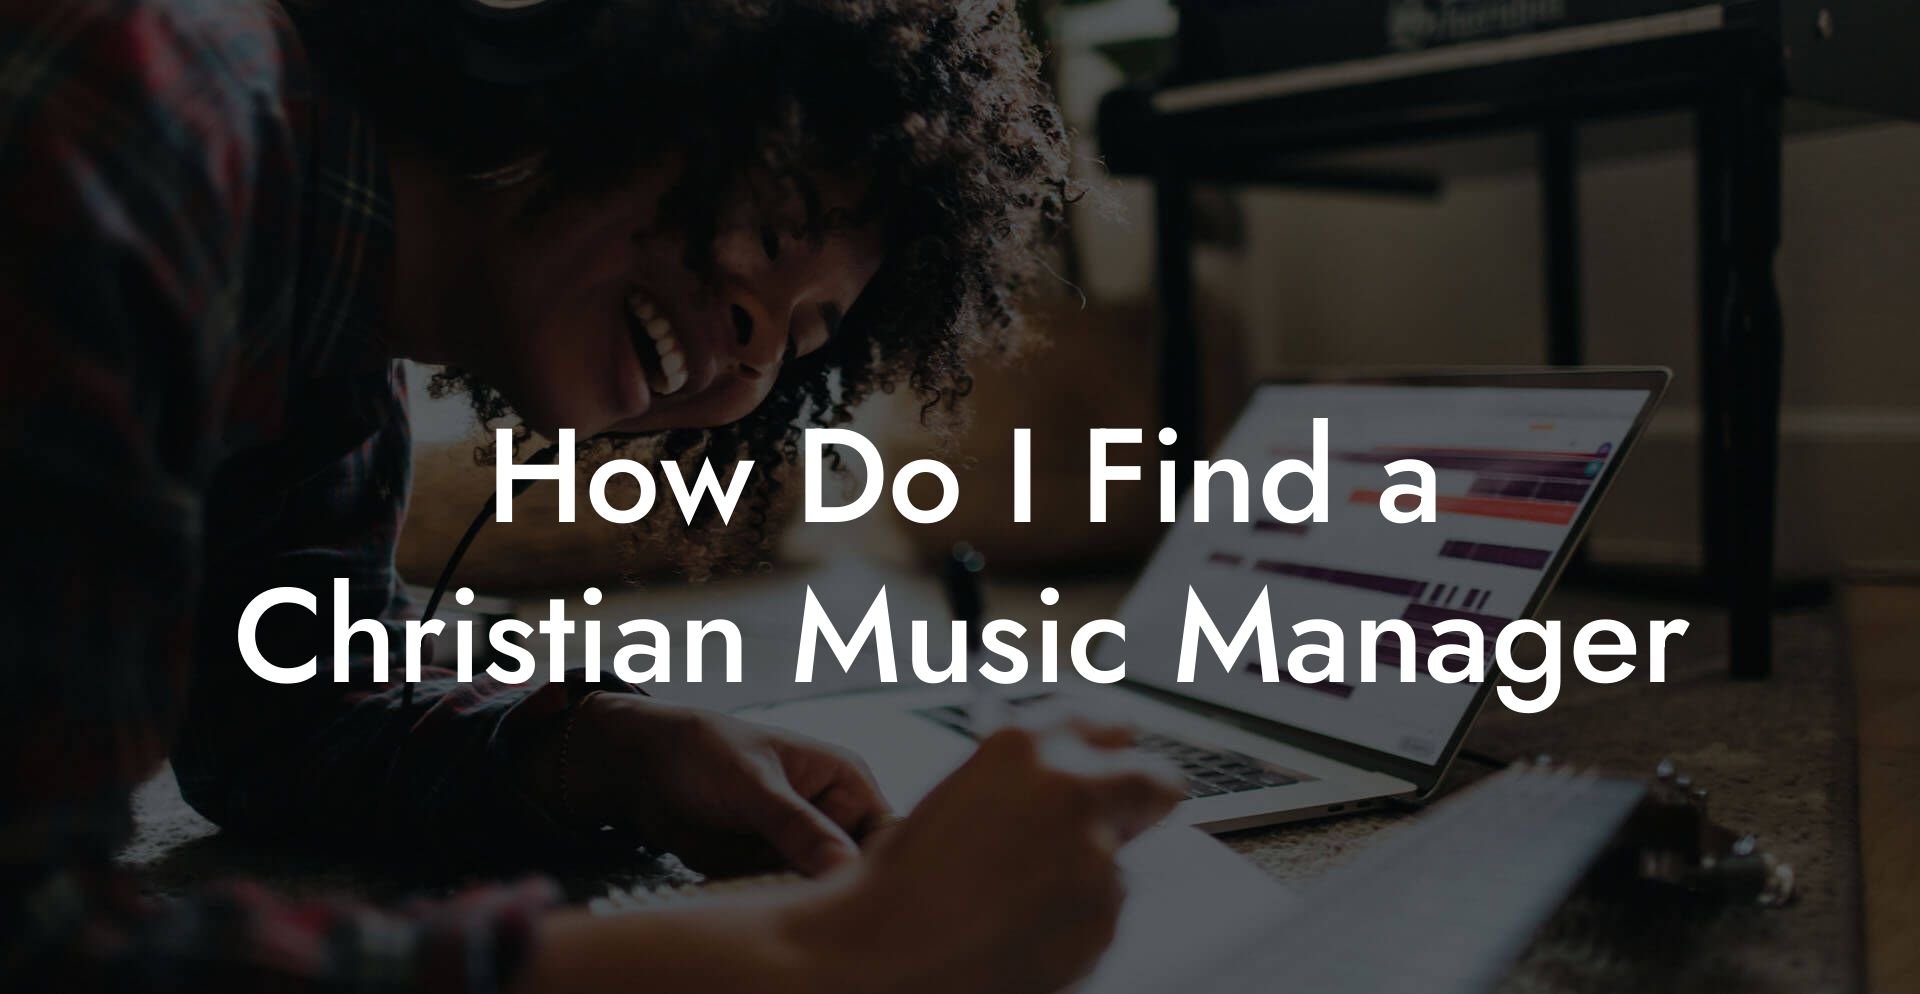 How Do I Find a Christian Music Manager